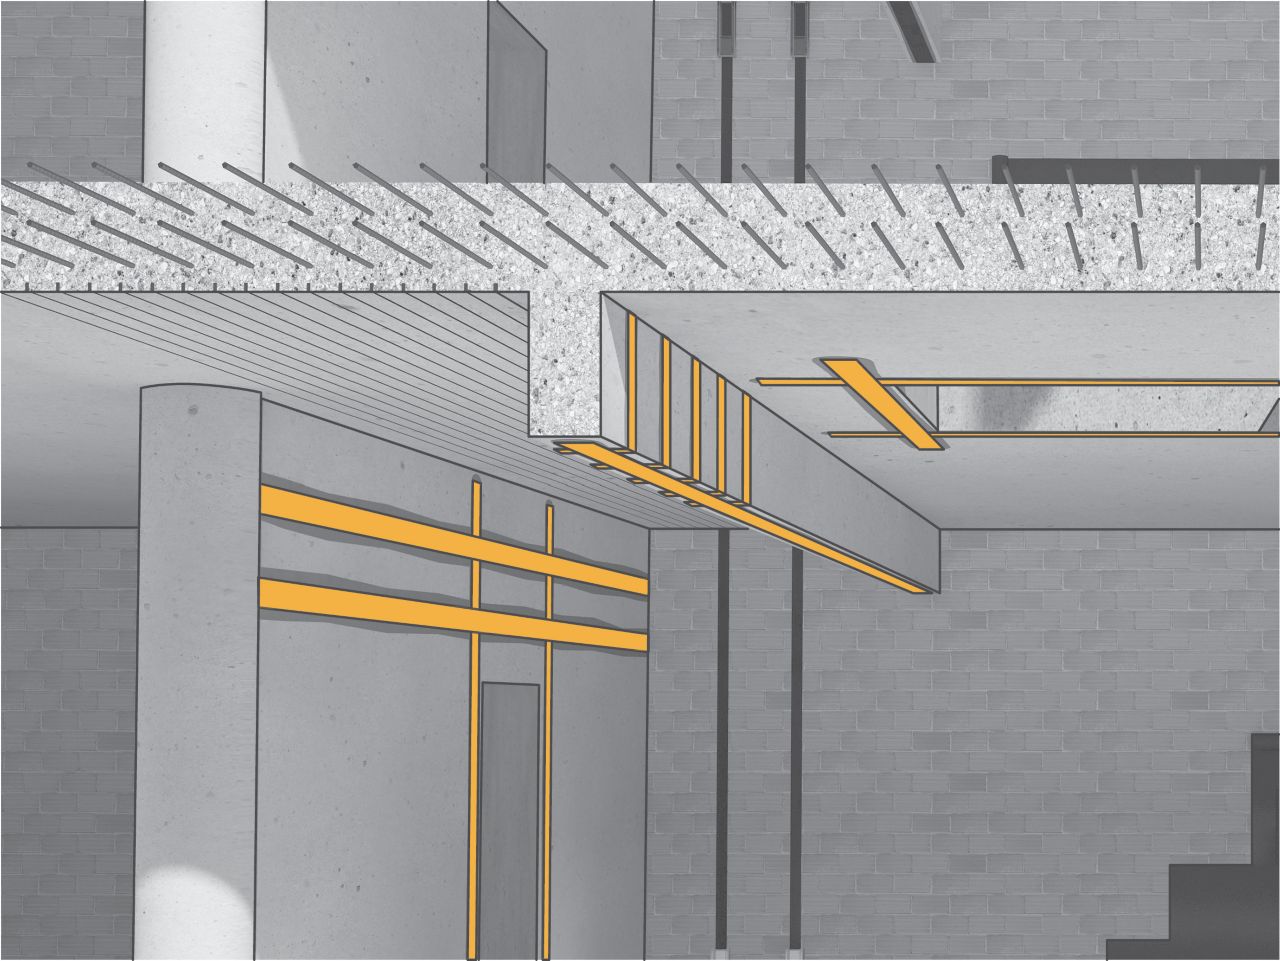 Illustration of concrete and brick building interior wall and beams reinforced with structural strengthening carbon fiber plates